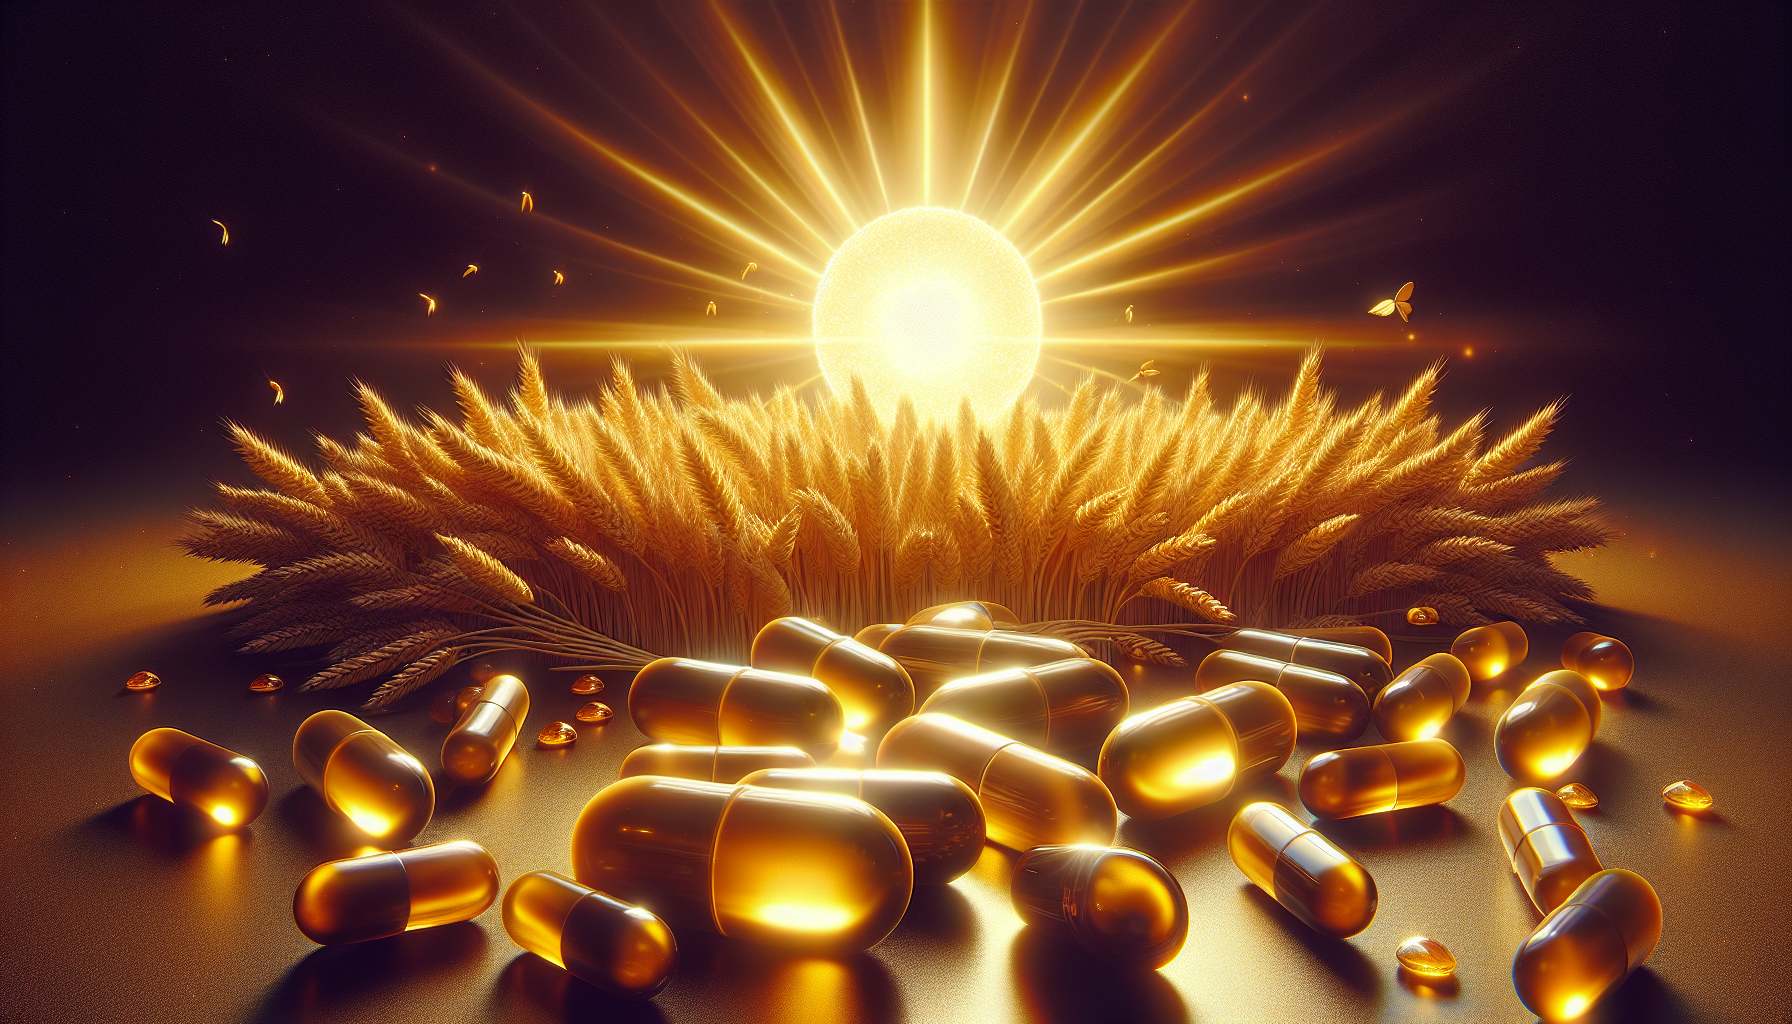 Illustration of sunlight and vitamin D supplements